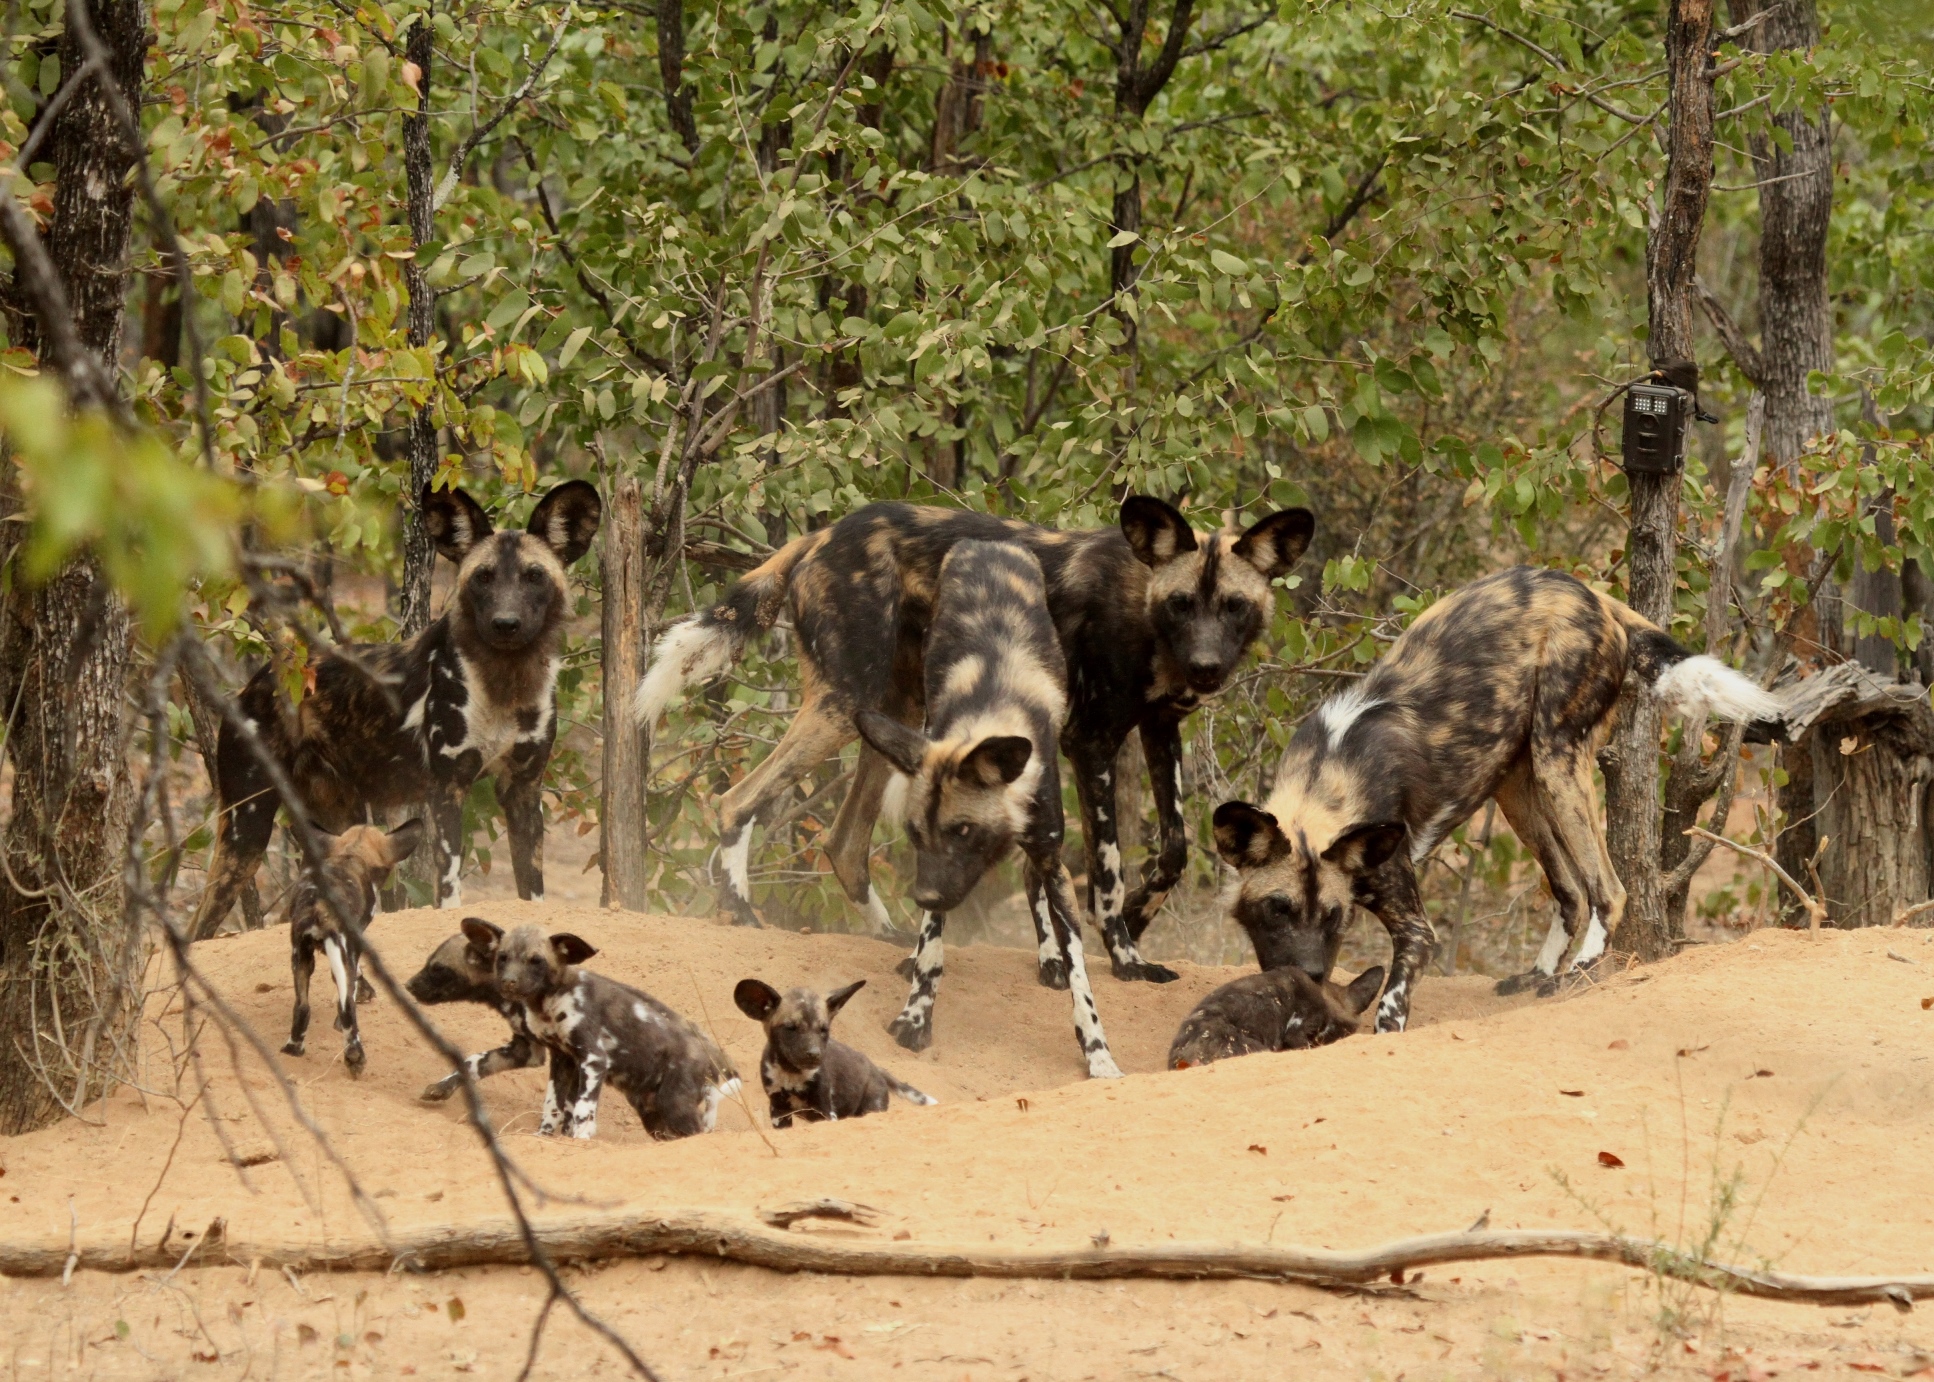 Climate change is increasing the mortality rate of African wild dog pups